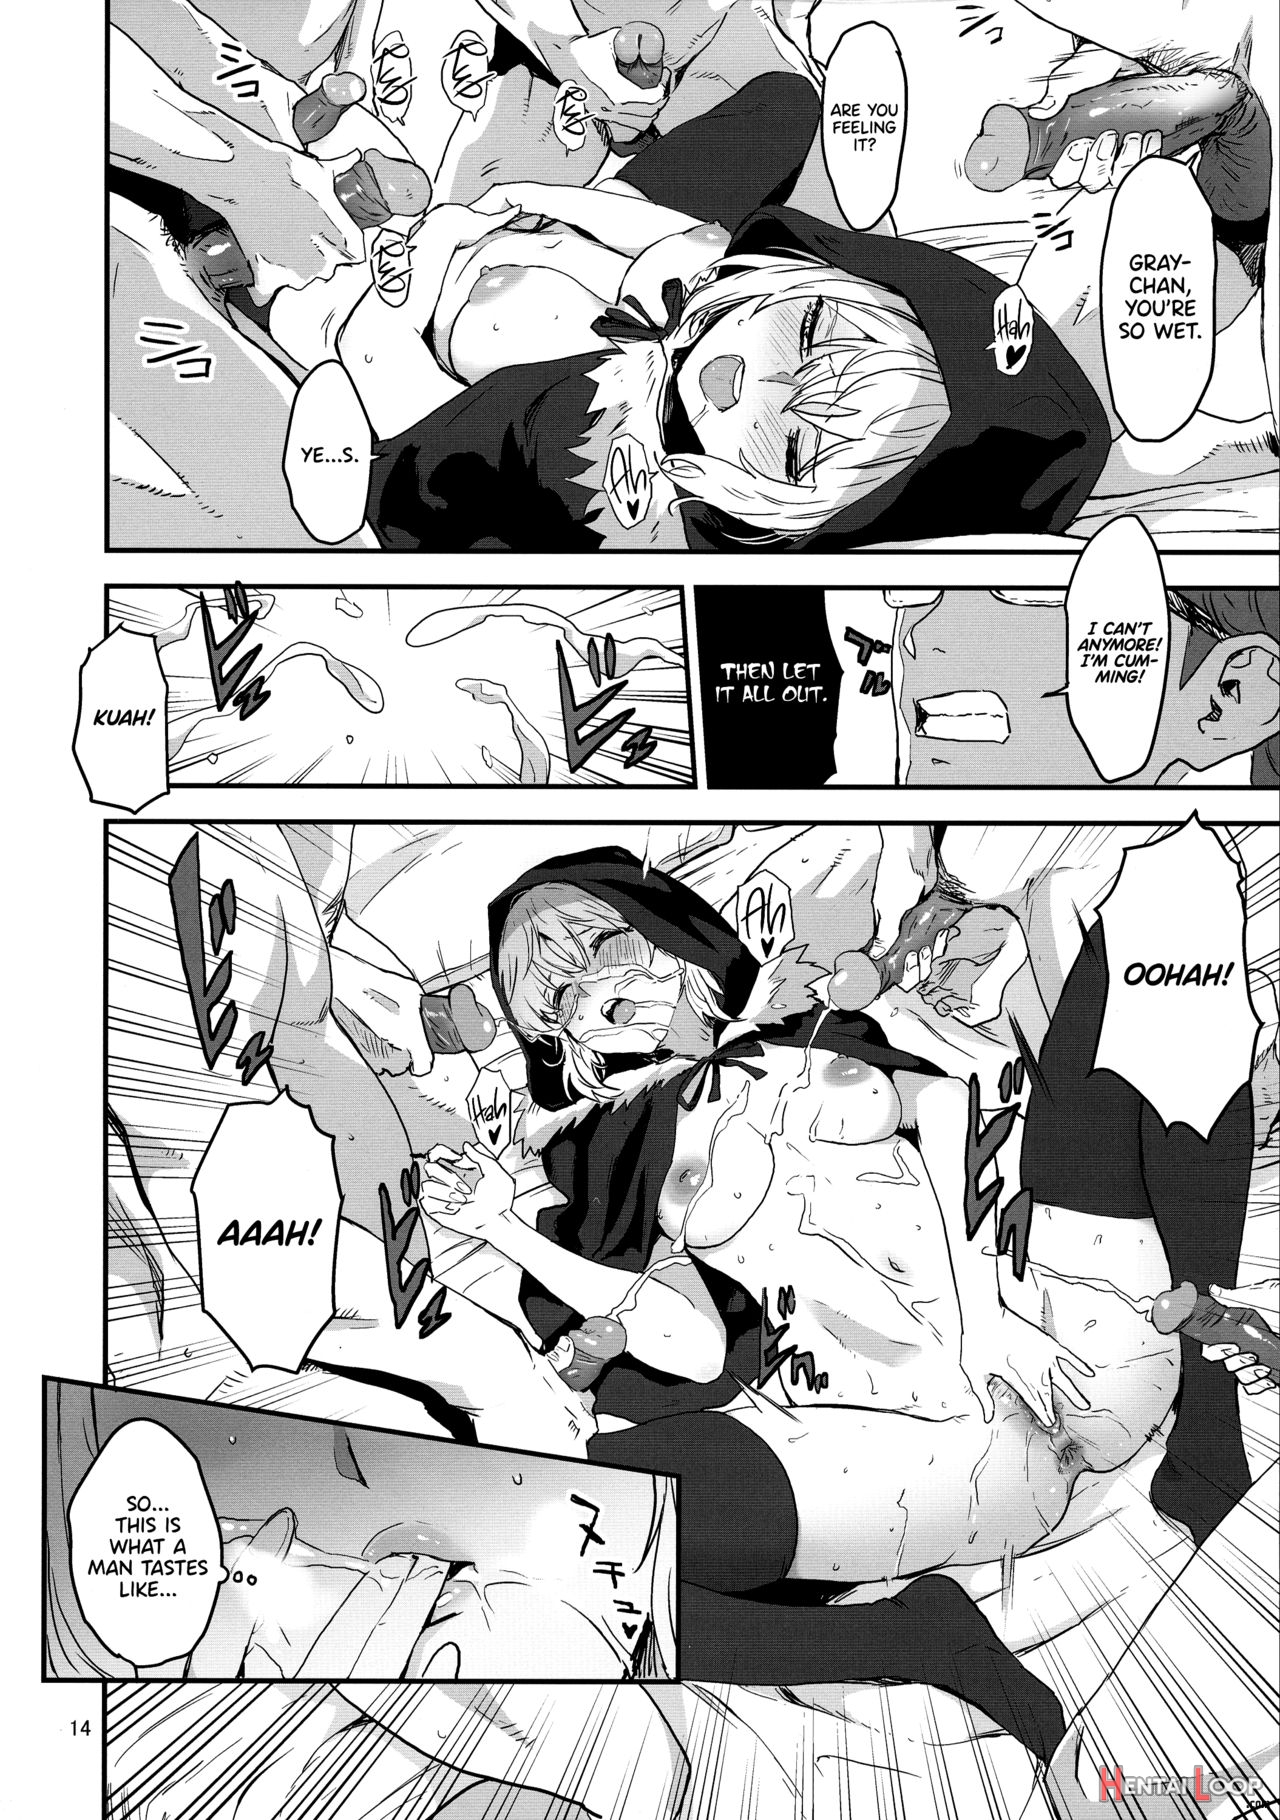 Taking Advantage Of Gray-chan Weakness, We Graduated From Our Virginity. page 14